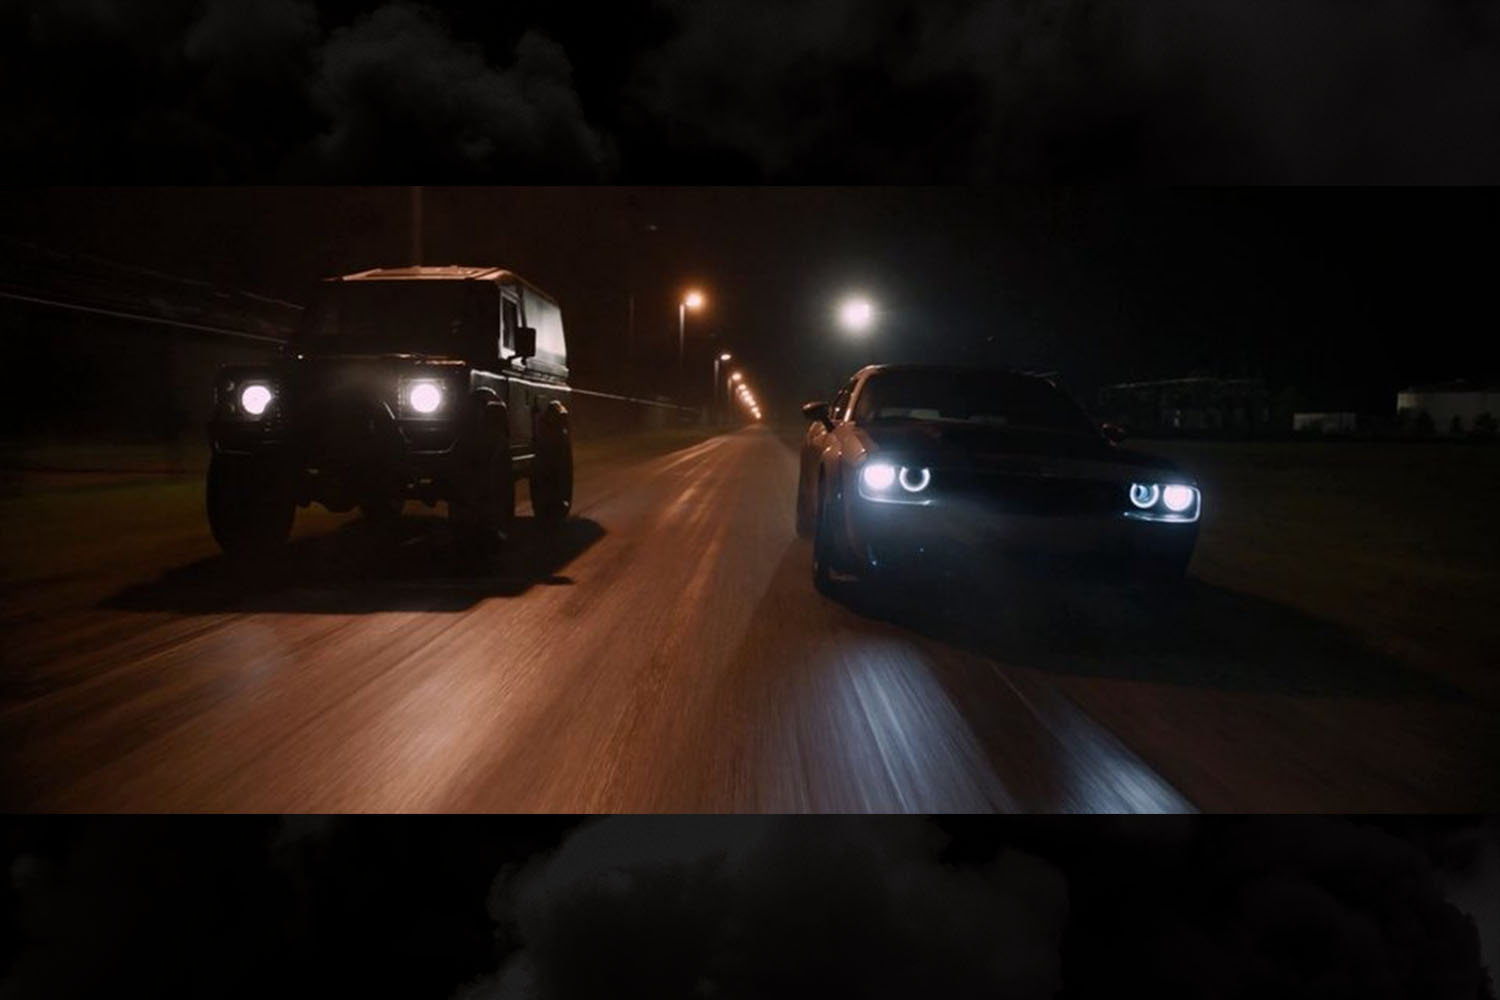 Luke Hobbs played by Dwayne "The Rock" Johnson driving a Land Rover Defender at night in a scene from The Fate of the Furious